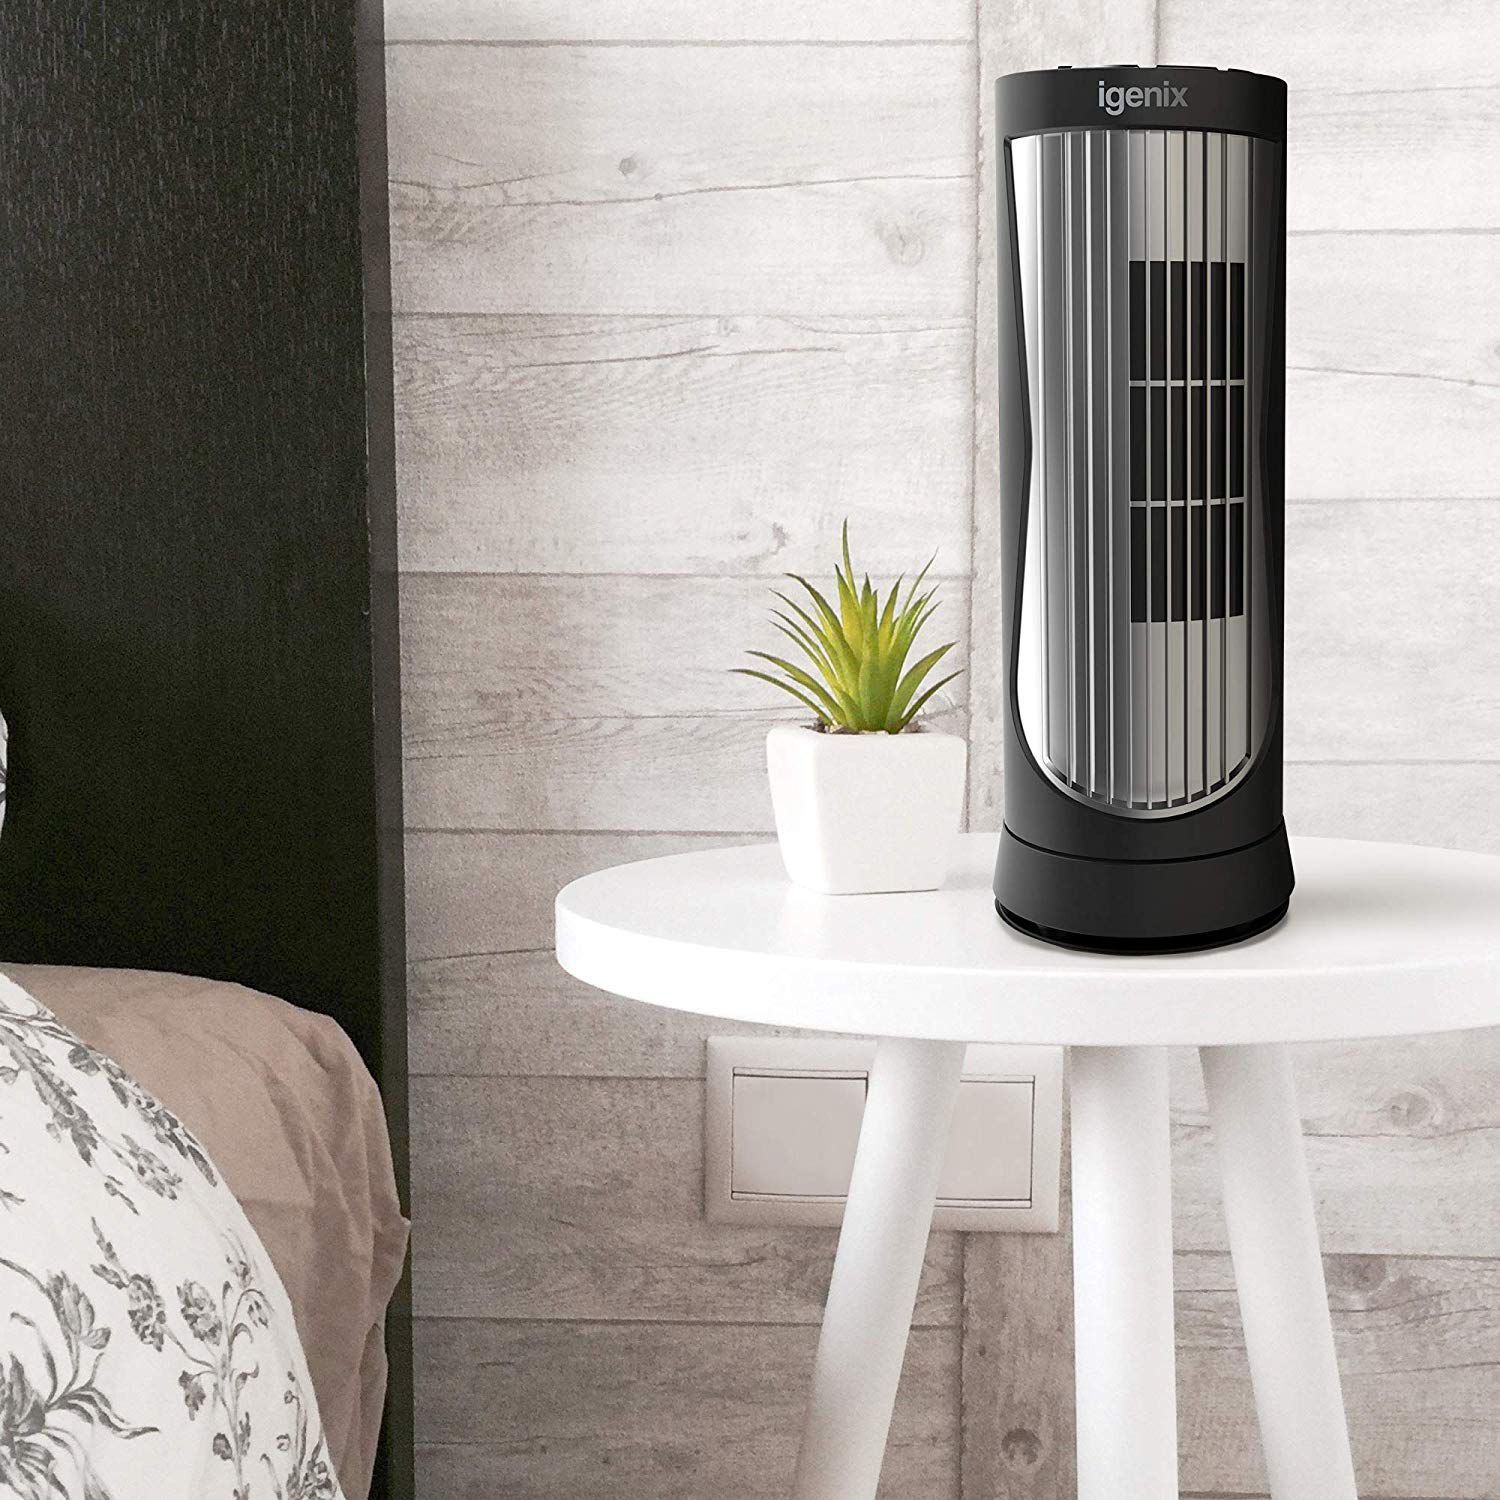 3 Easy Cooling Fan Tricks To Cool Your Room During Hot Weather